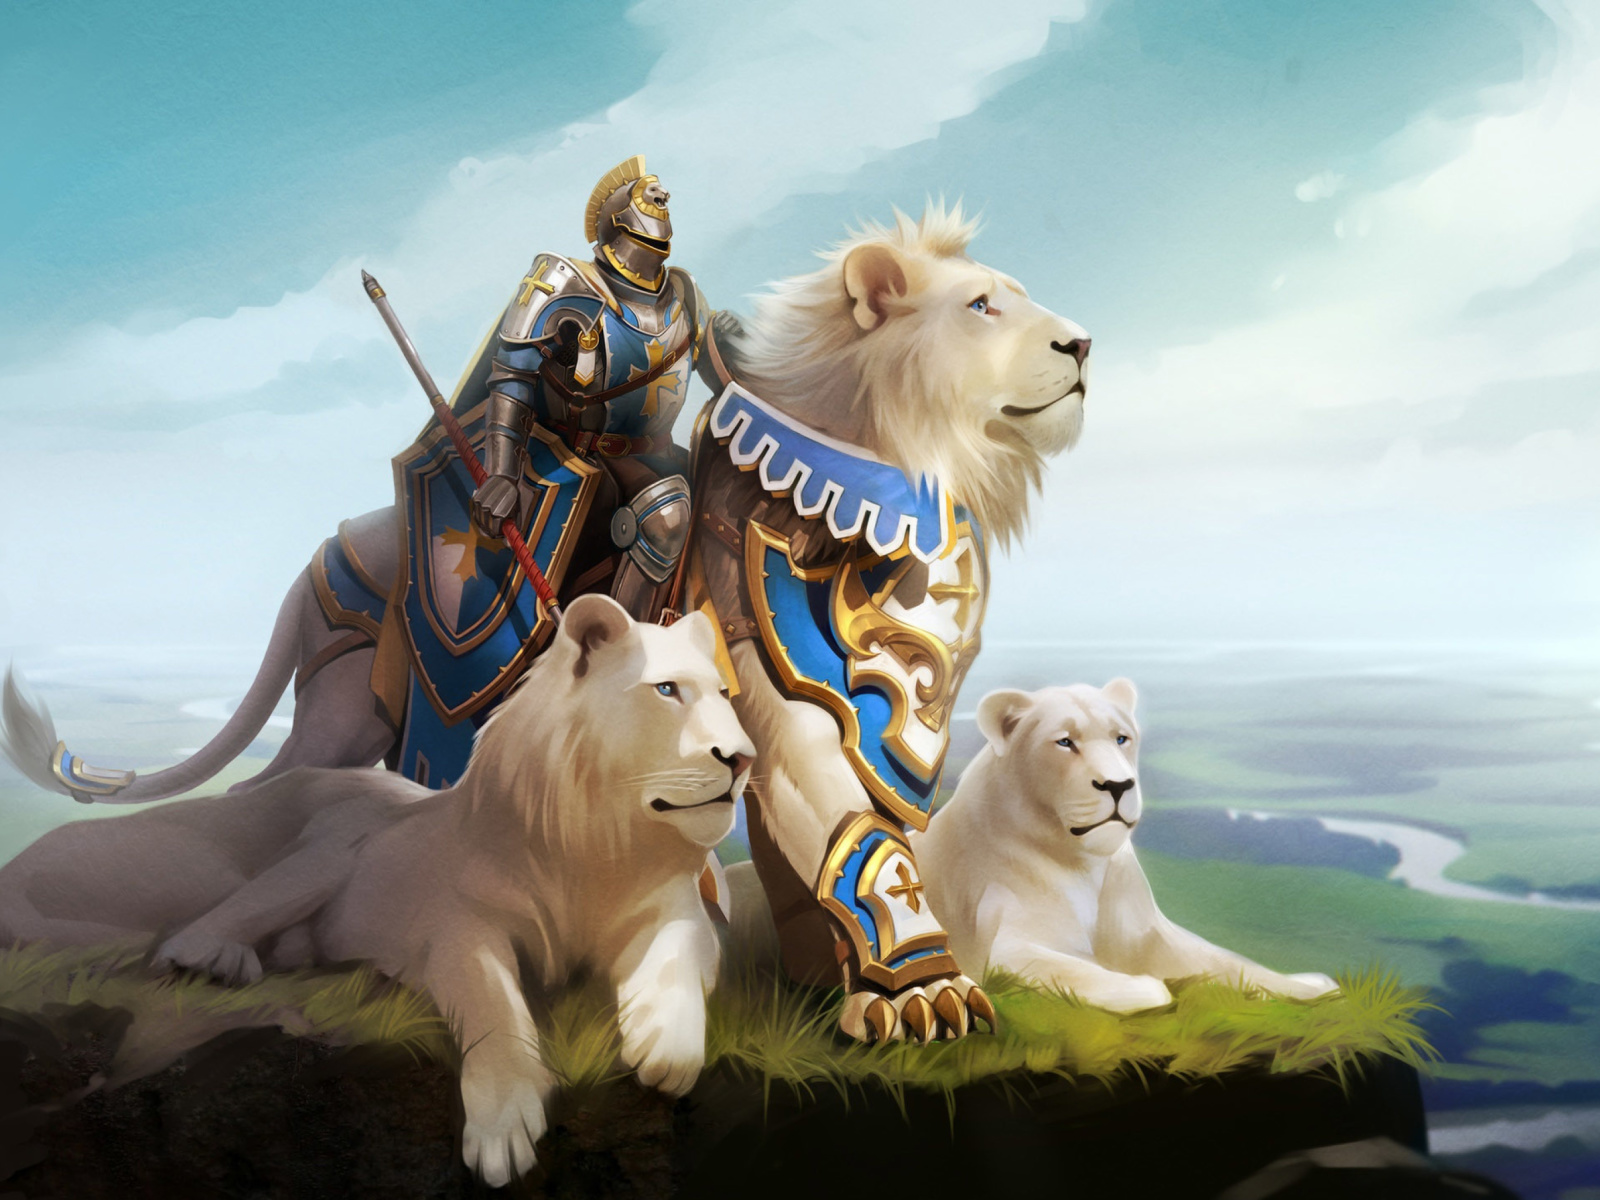 Das Knight with Lions Wallpaper 1600x1200